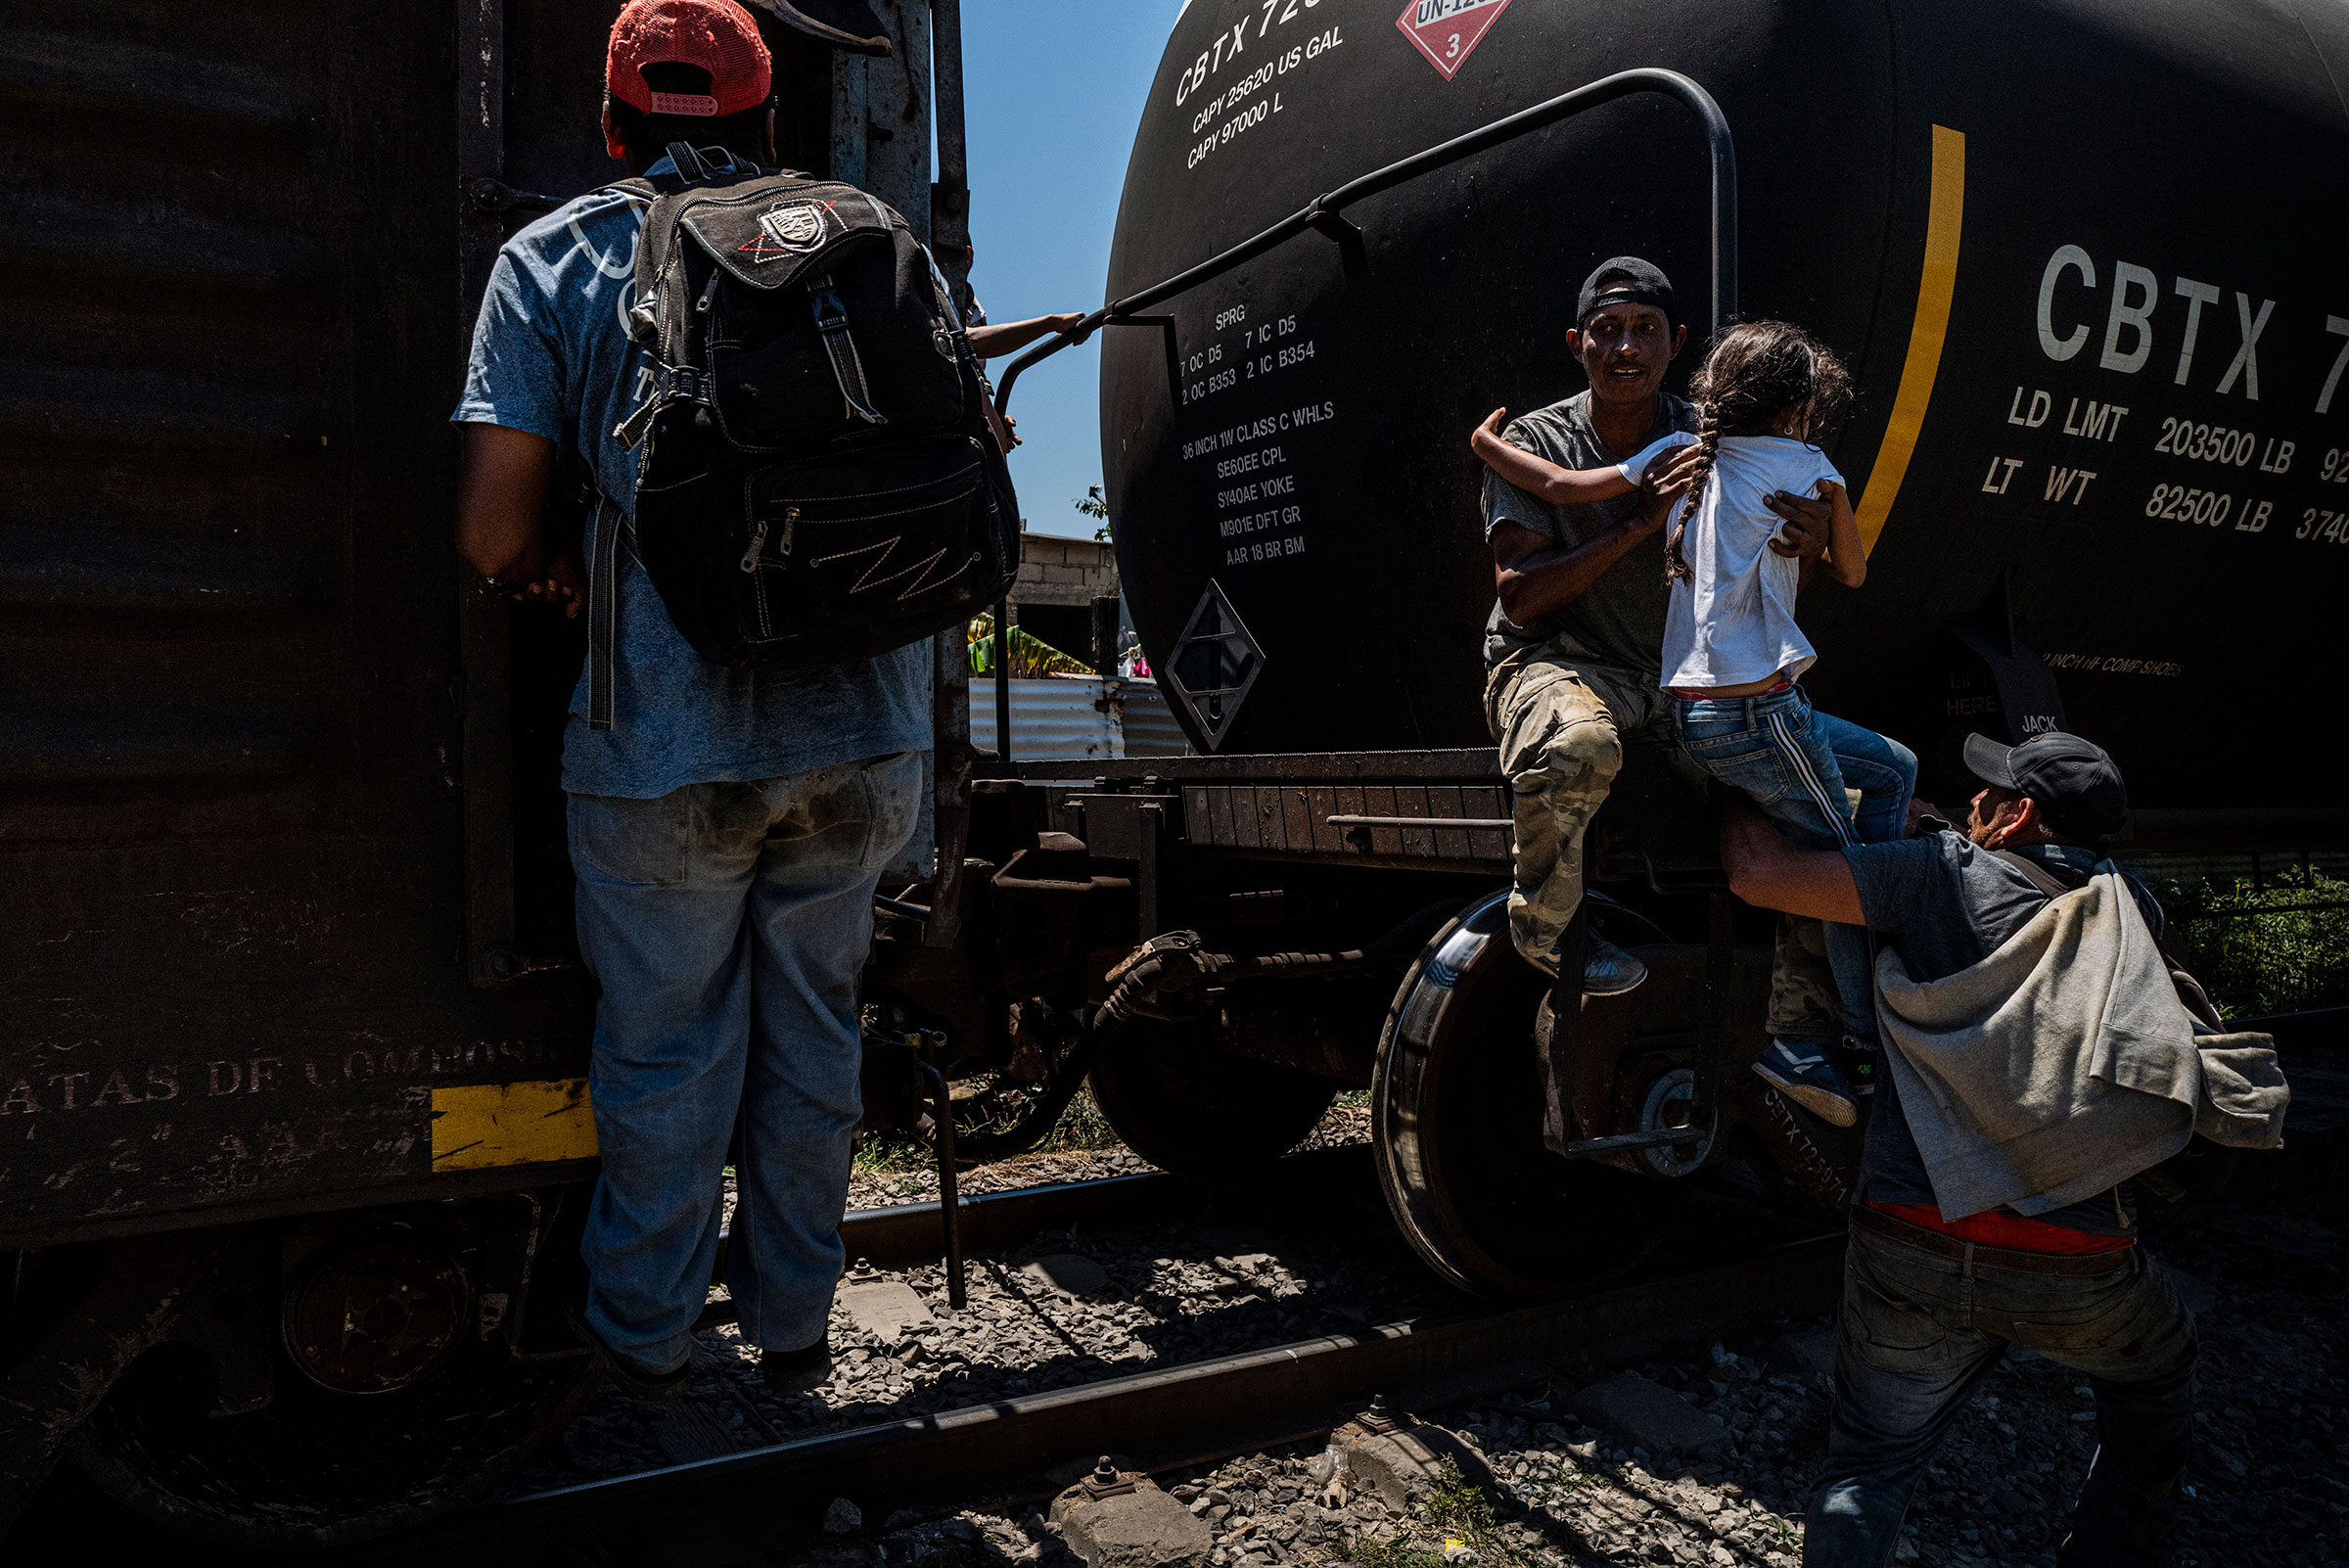 A father helps his young daughter onto a train in Coatzacoalcos in the Mexican state of Veracruz on March 24, 2021. The train, also known as La Bestia, or “The Beast” is part of a larger network of cargo trains to which migrants cling onto in order to migrate north through Mexico. (Yael Martínez—Magnum Photos for TIME)